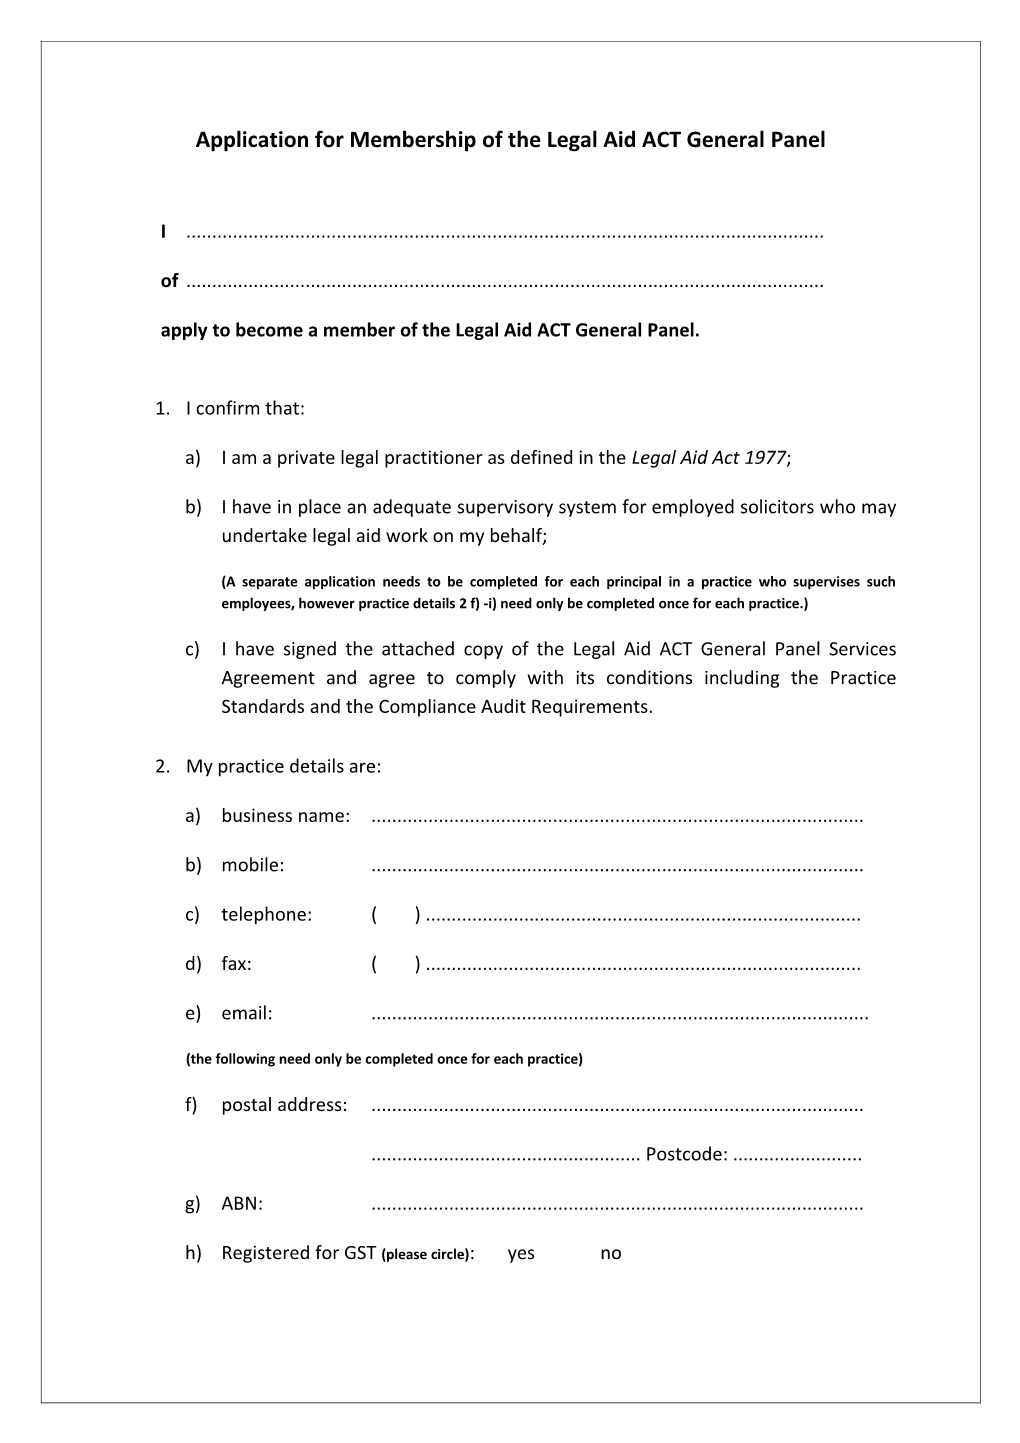 Application for Membership of the Legal Aid ACT General Panel